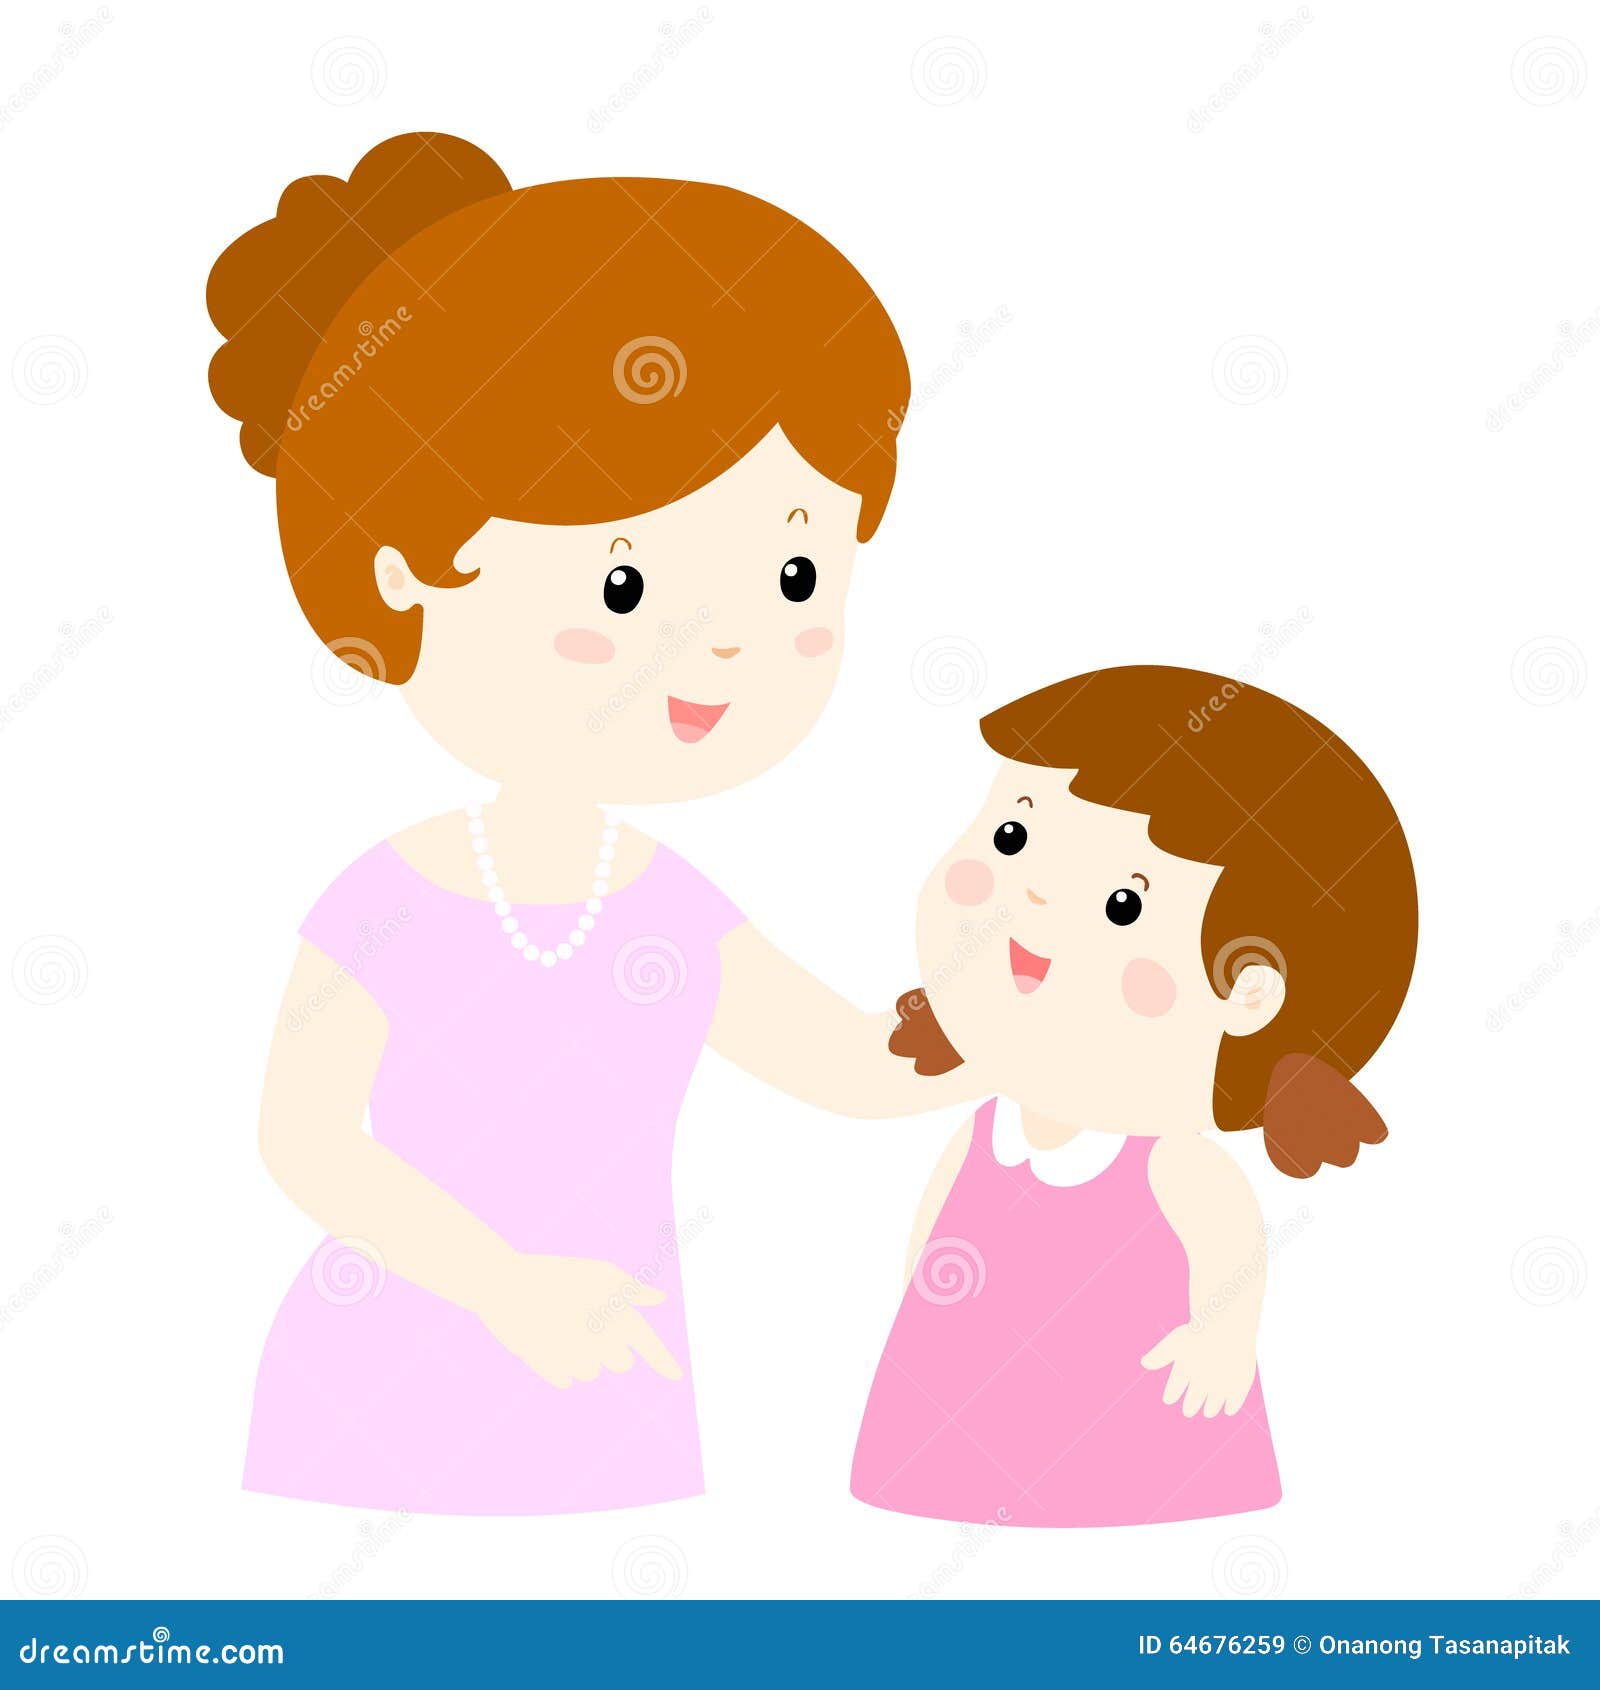 Mom Talk To Her Daughter Gently Cartoon Stock Vector - Illustration of  female, icon: 64676259